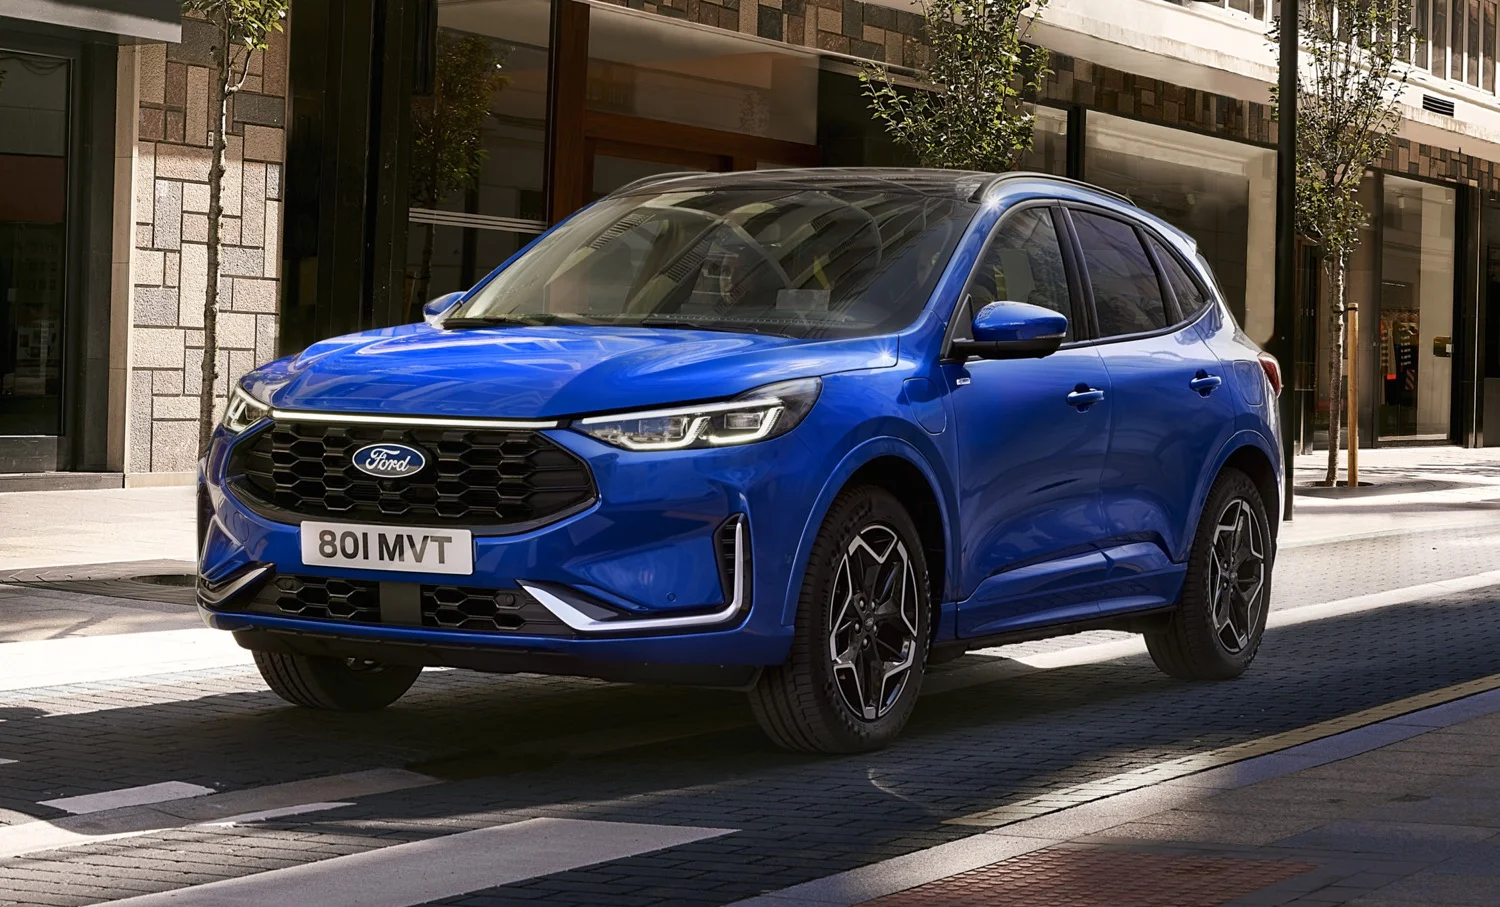 2020 Ford Escape Debuts With Whole New Look, Two Hybrid Choices